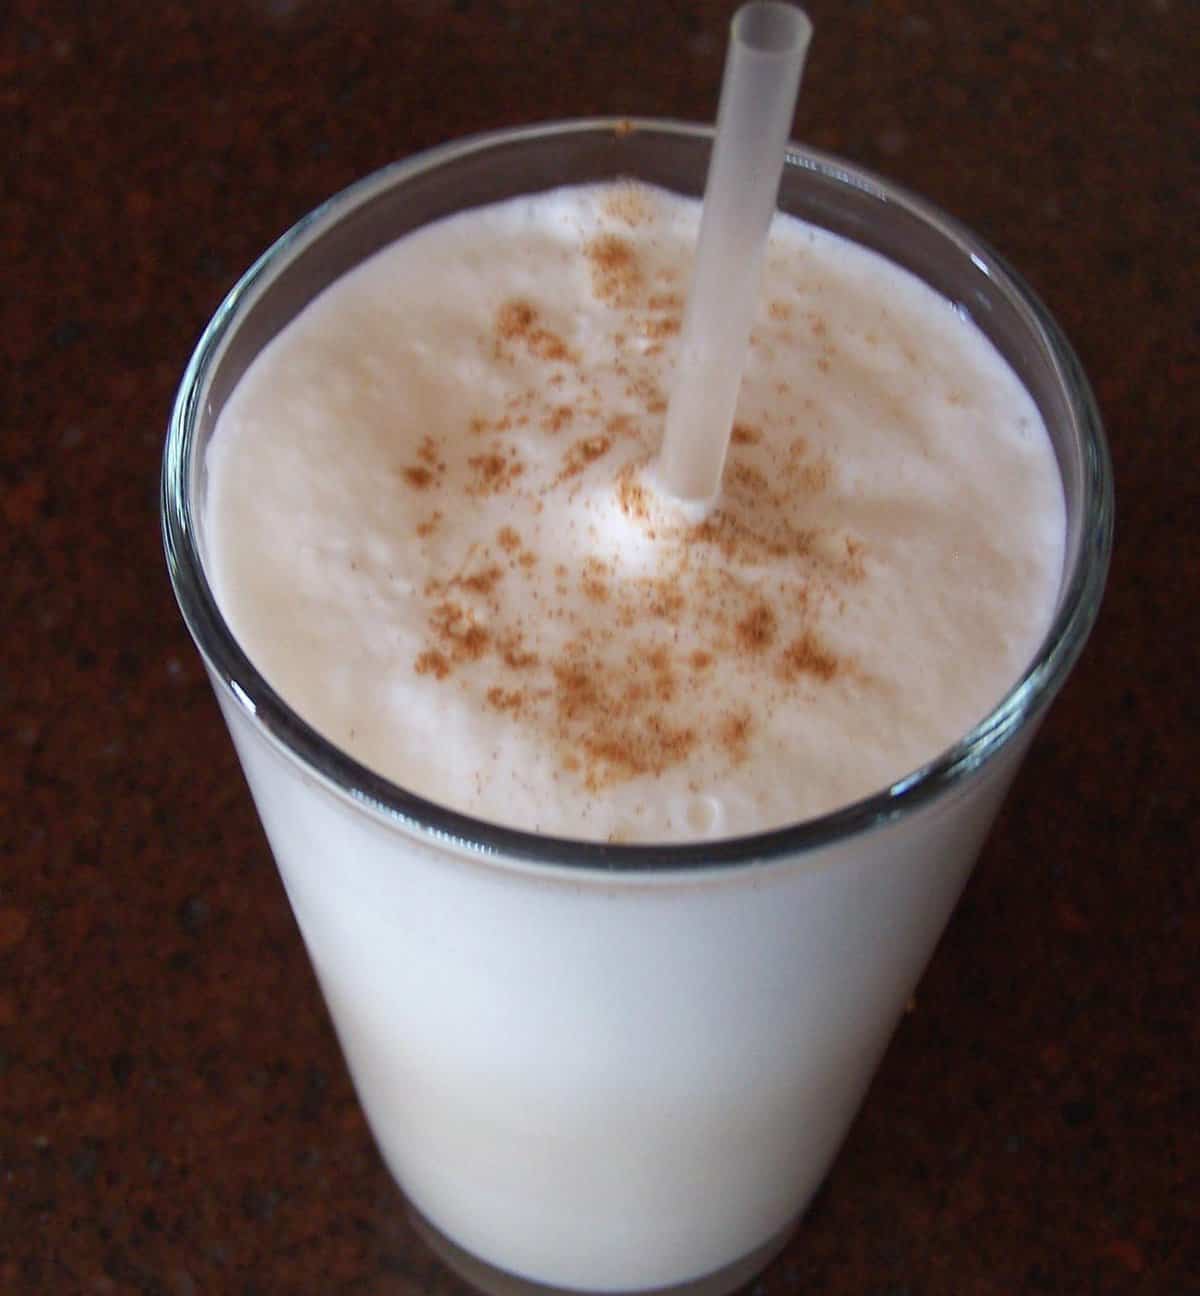  One sip of this sweet and creamy concoction will transport you straight to Sicily.